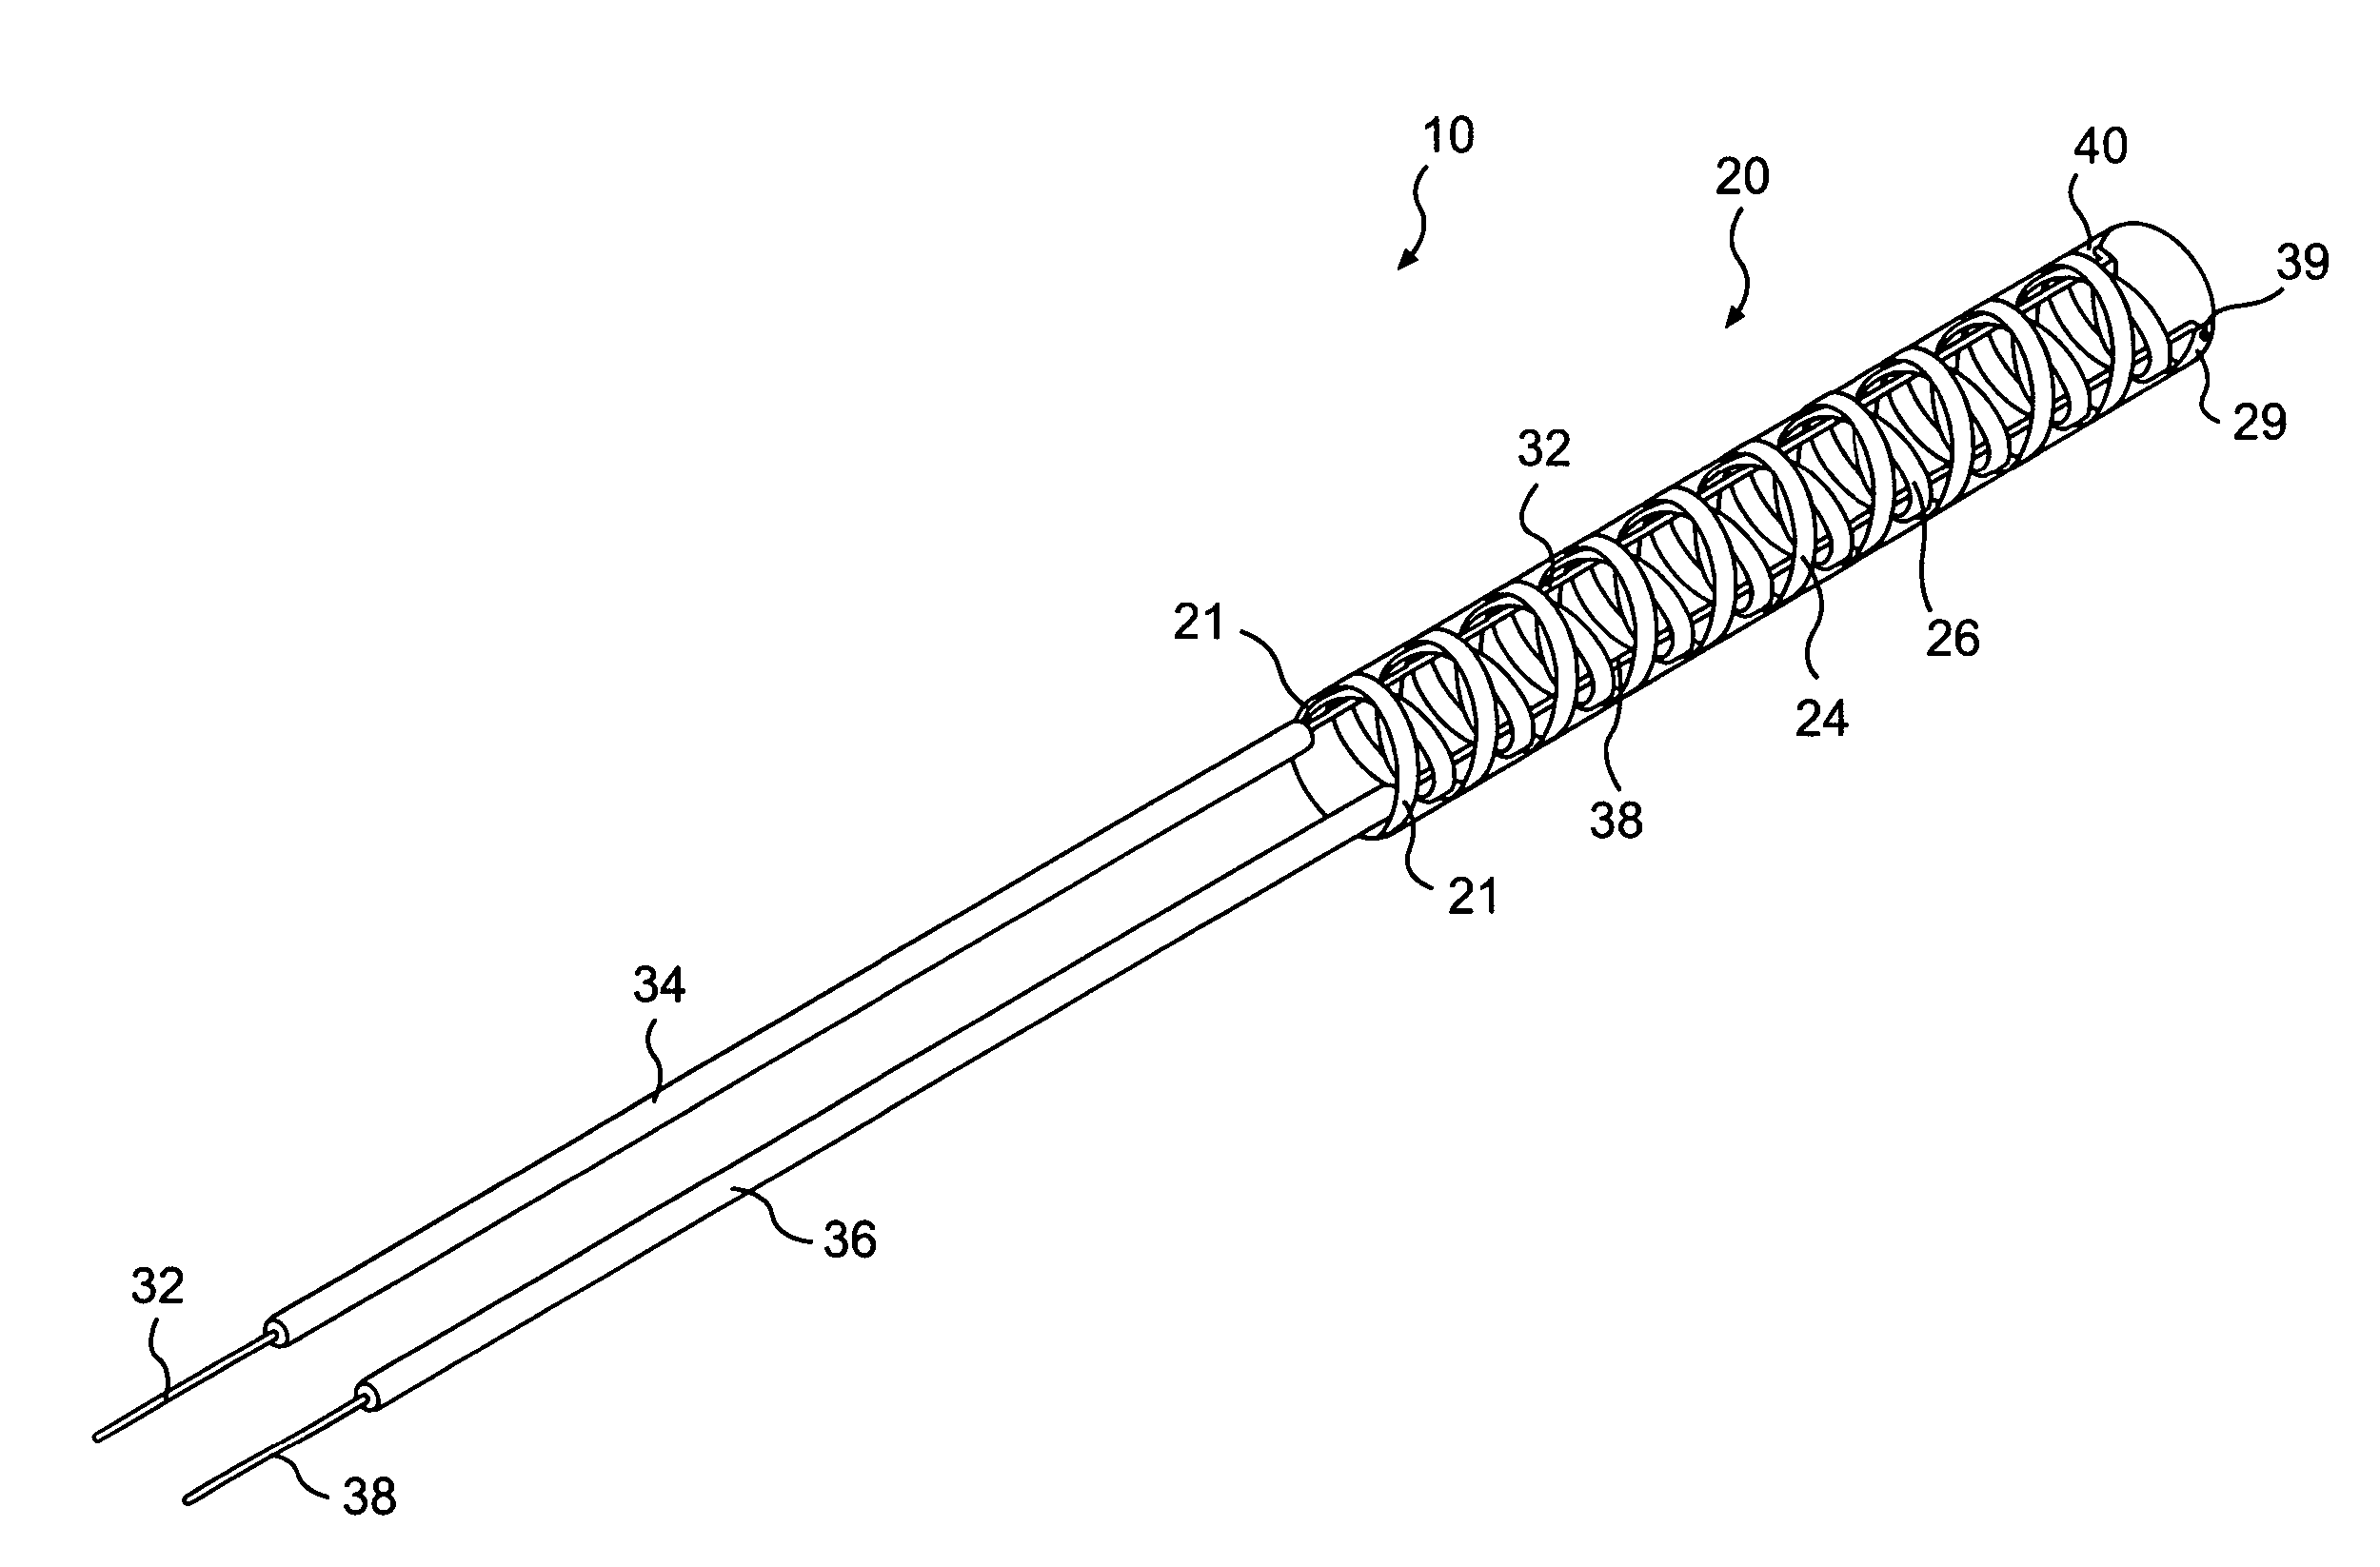 Access catheter having dilation capability and related methods